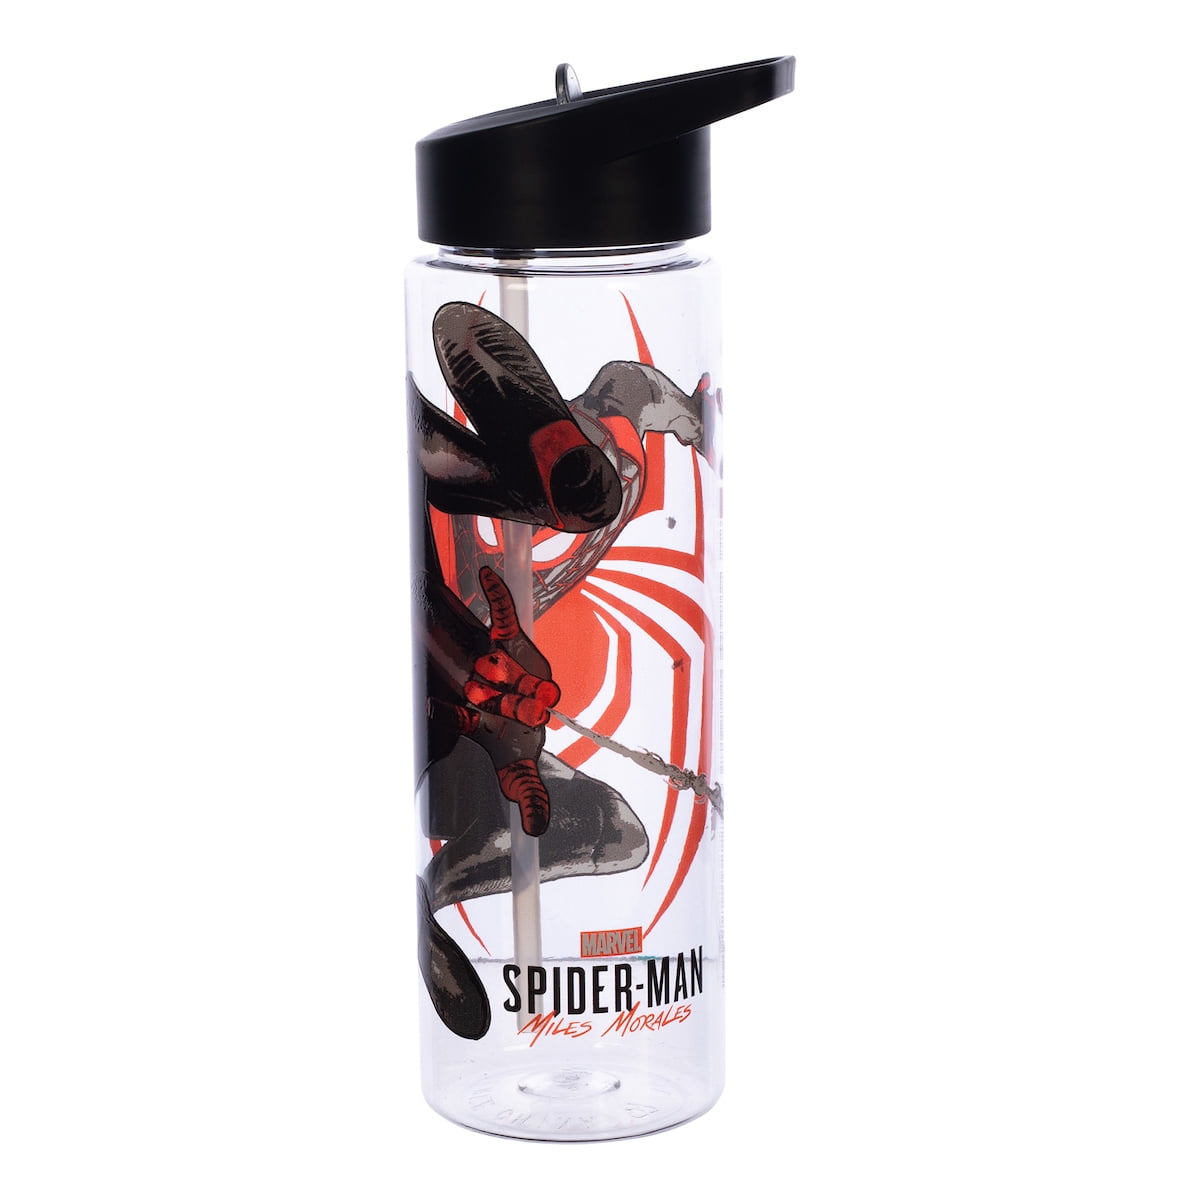 Miles Morales Artist Series Stainless Steel Water Bottle by Mateus Manhanini